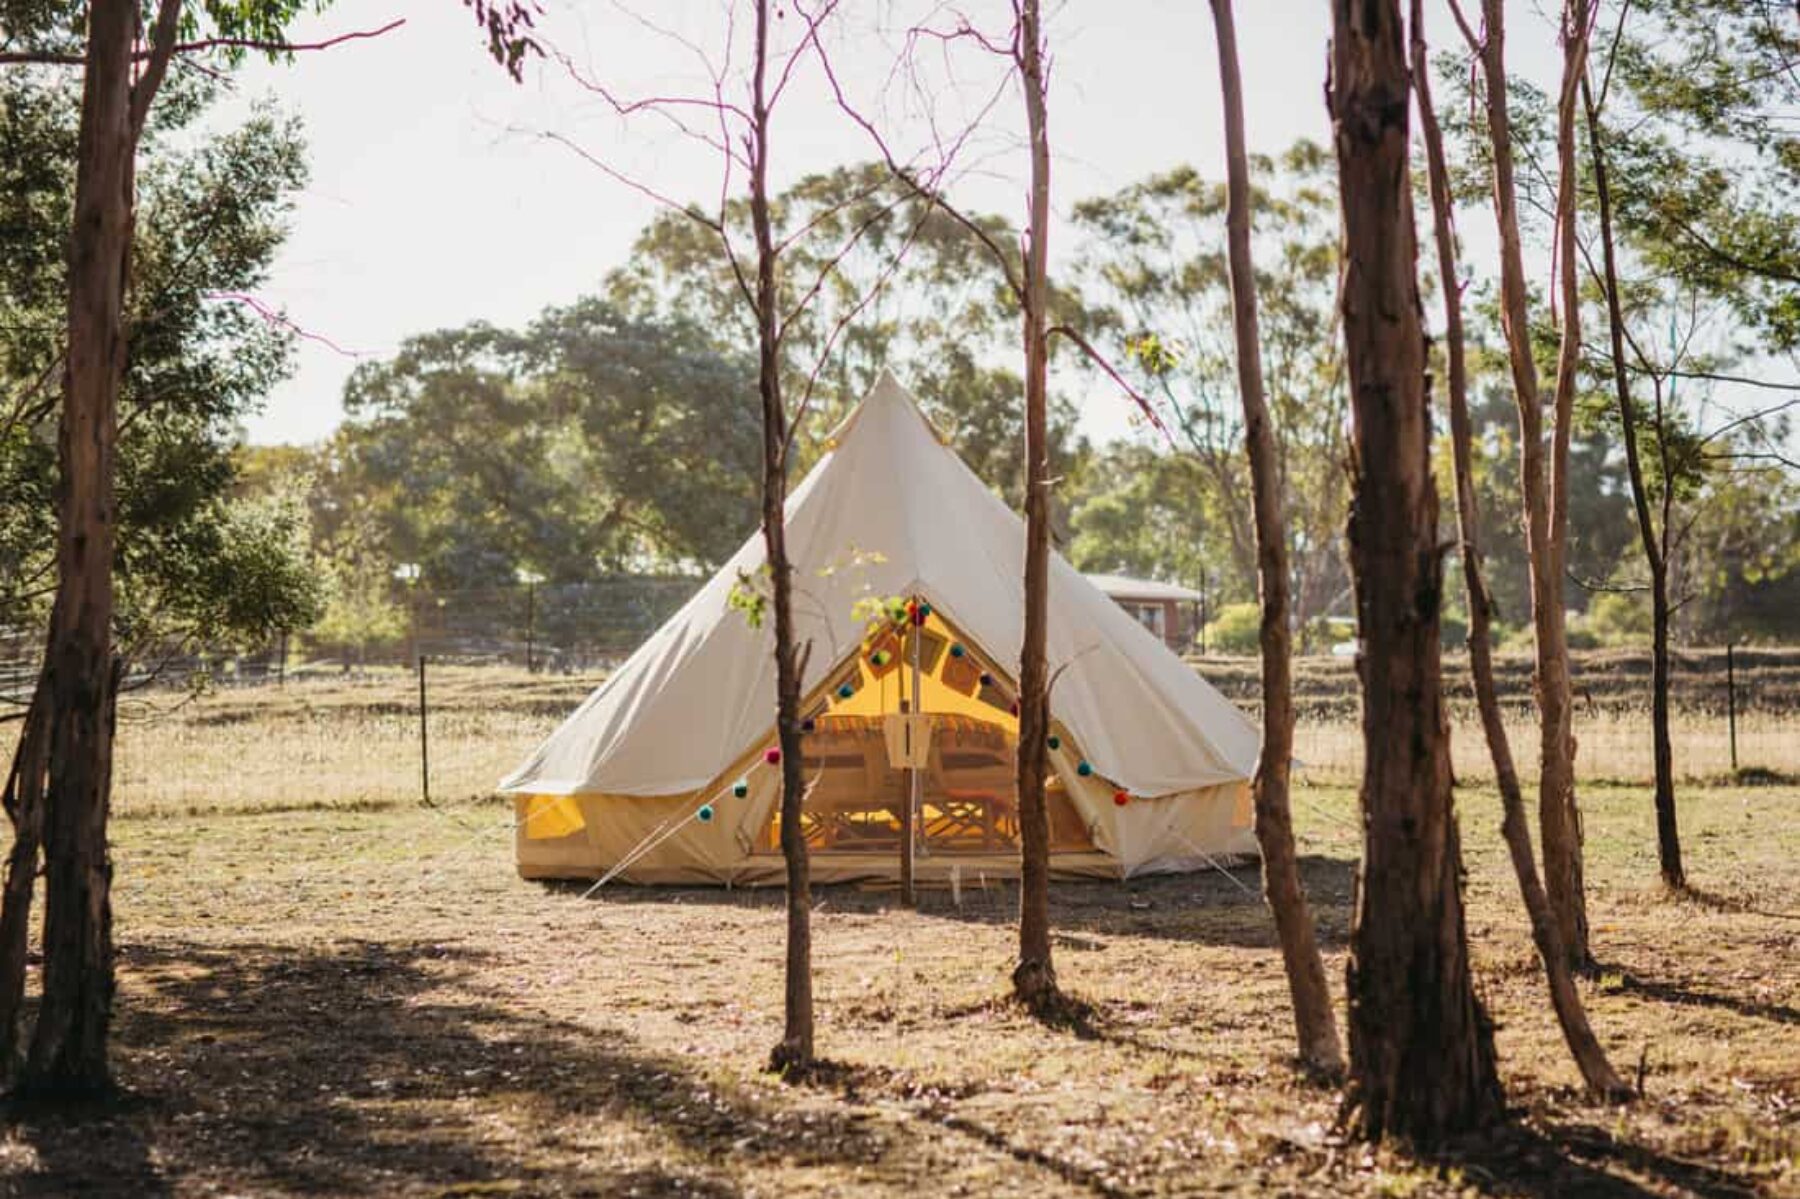 quirky DIY festival wedding in the Otway Ranges VIC